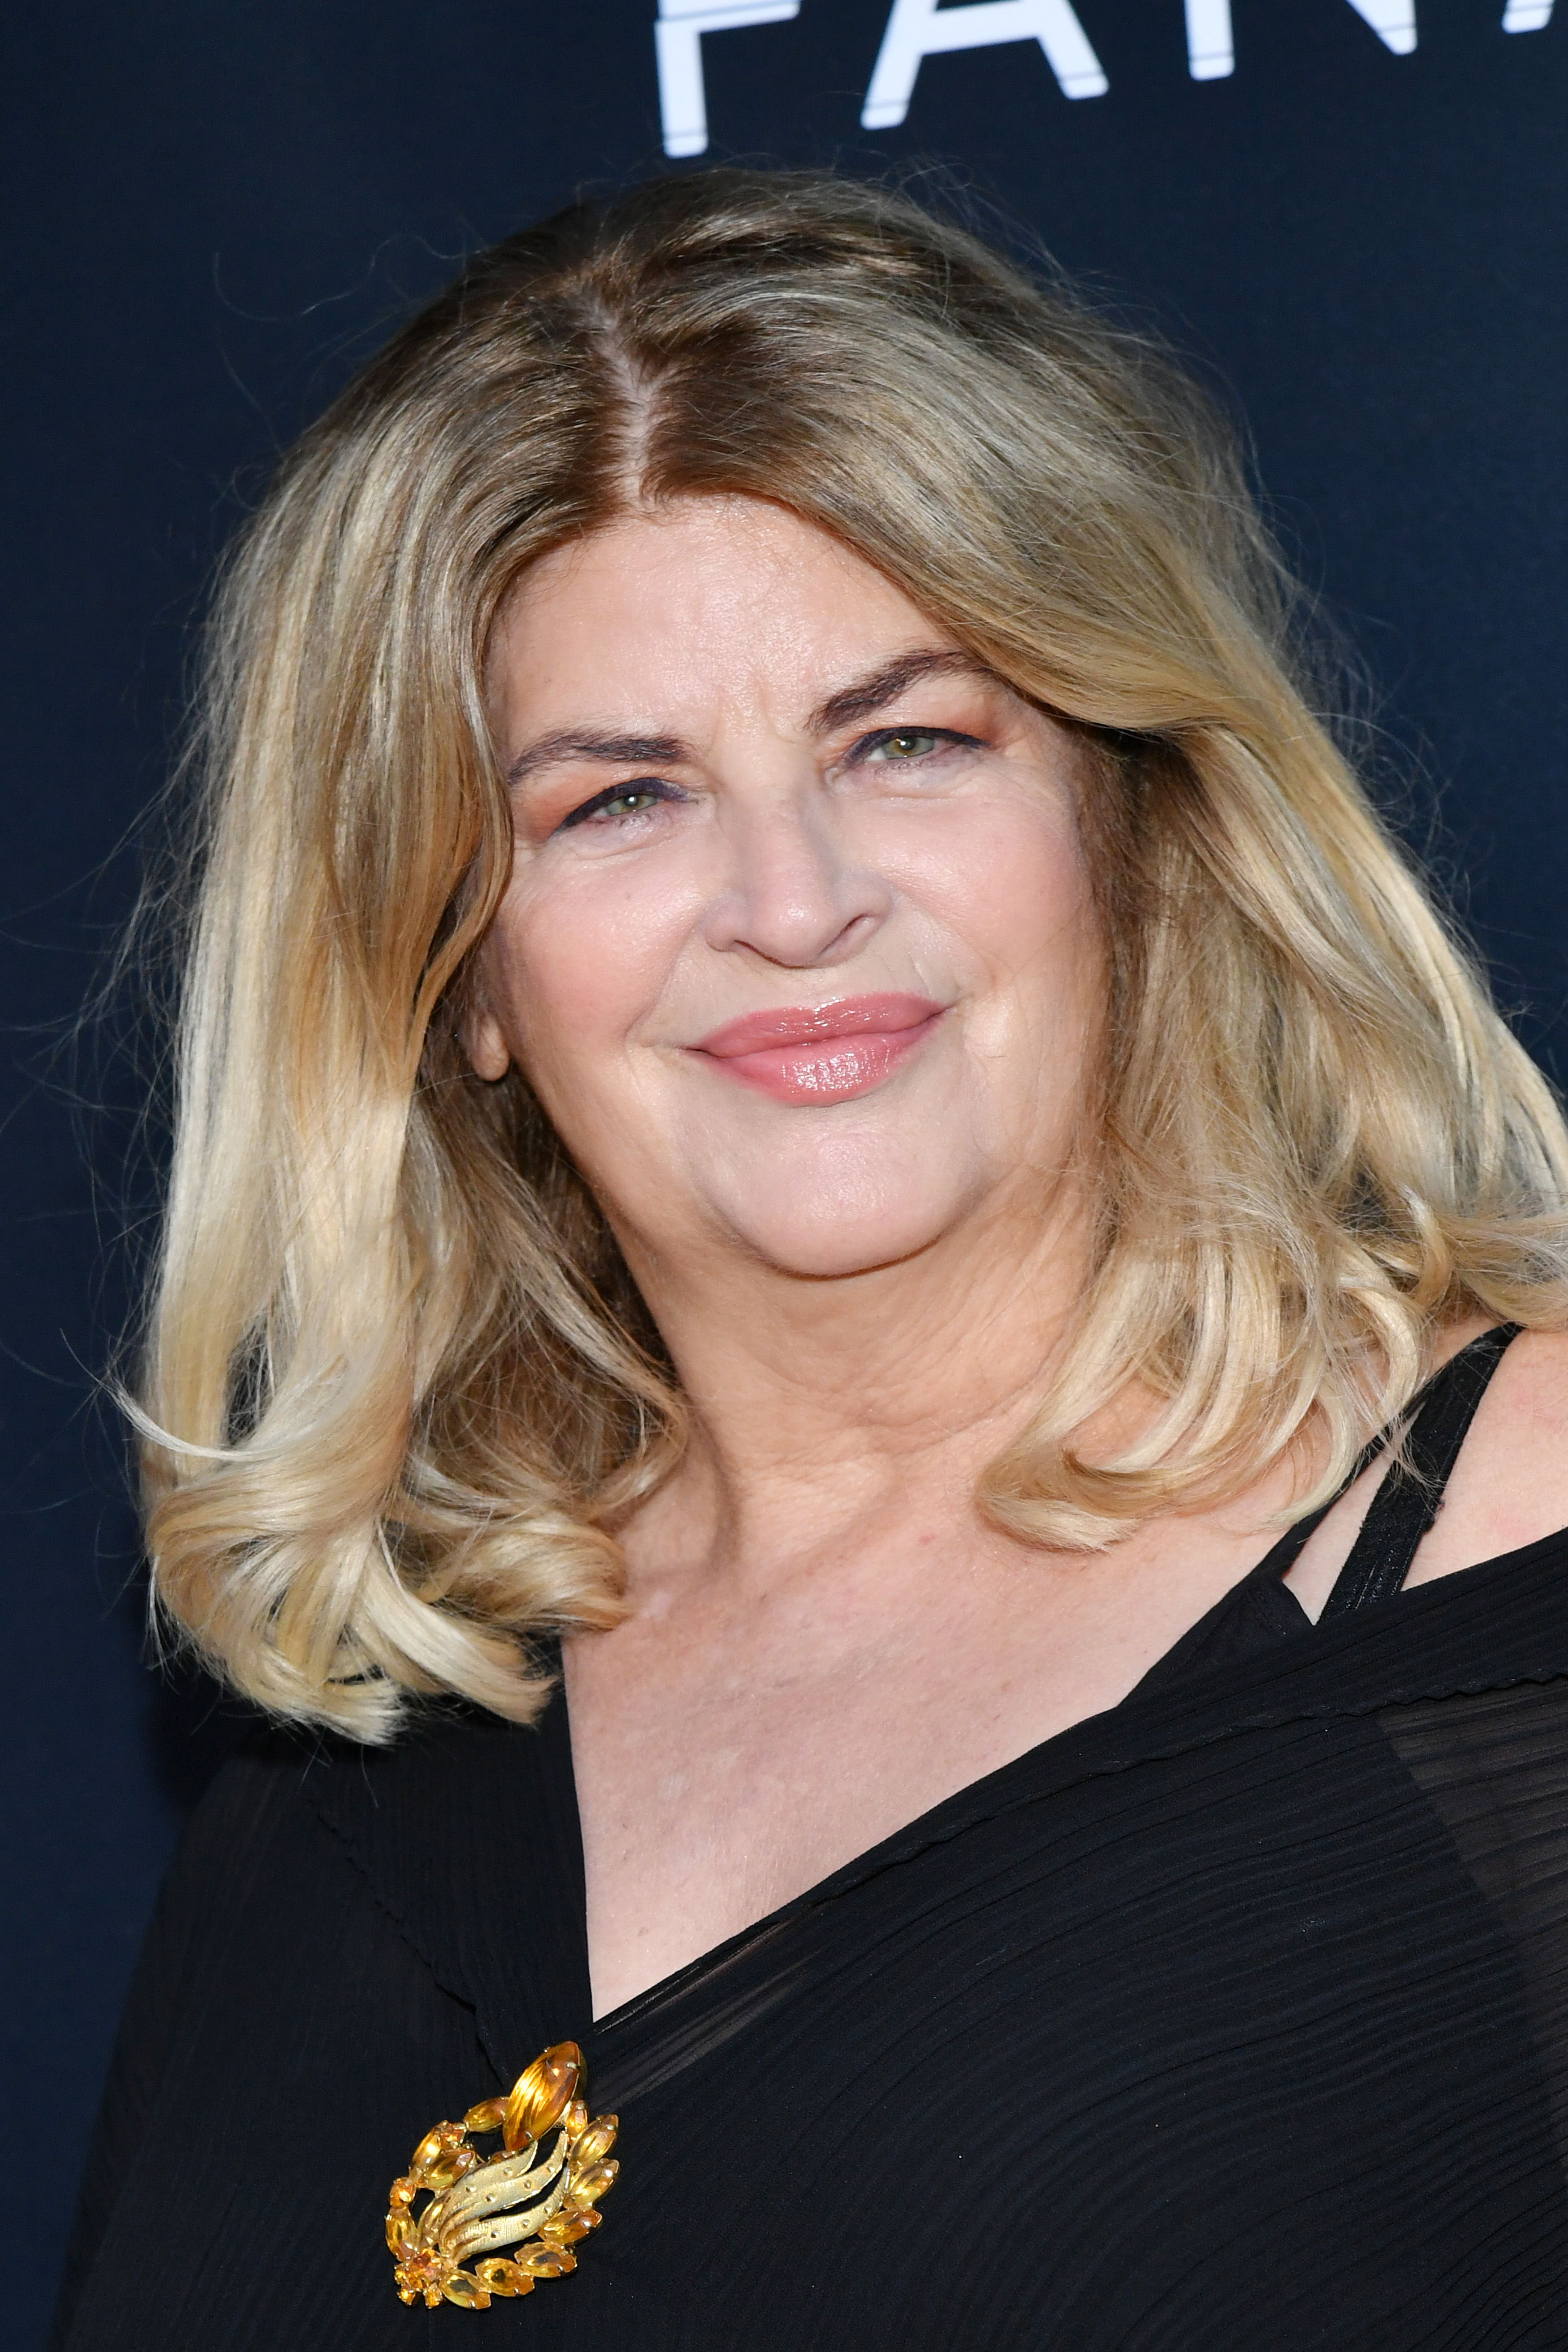 Kirstie Alley attends the premiere of Quiver Distribution's "The Fanatic" at the Egyptian Theatre on August 22, 2019 in Hollywood, California | Source: Getty Images